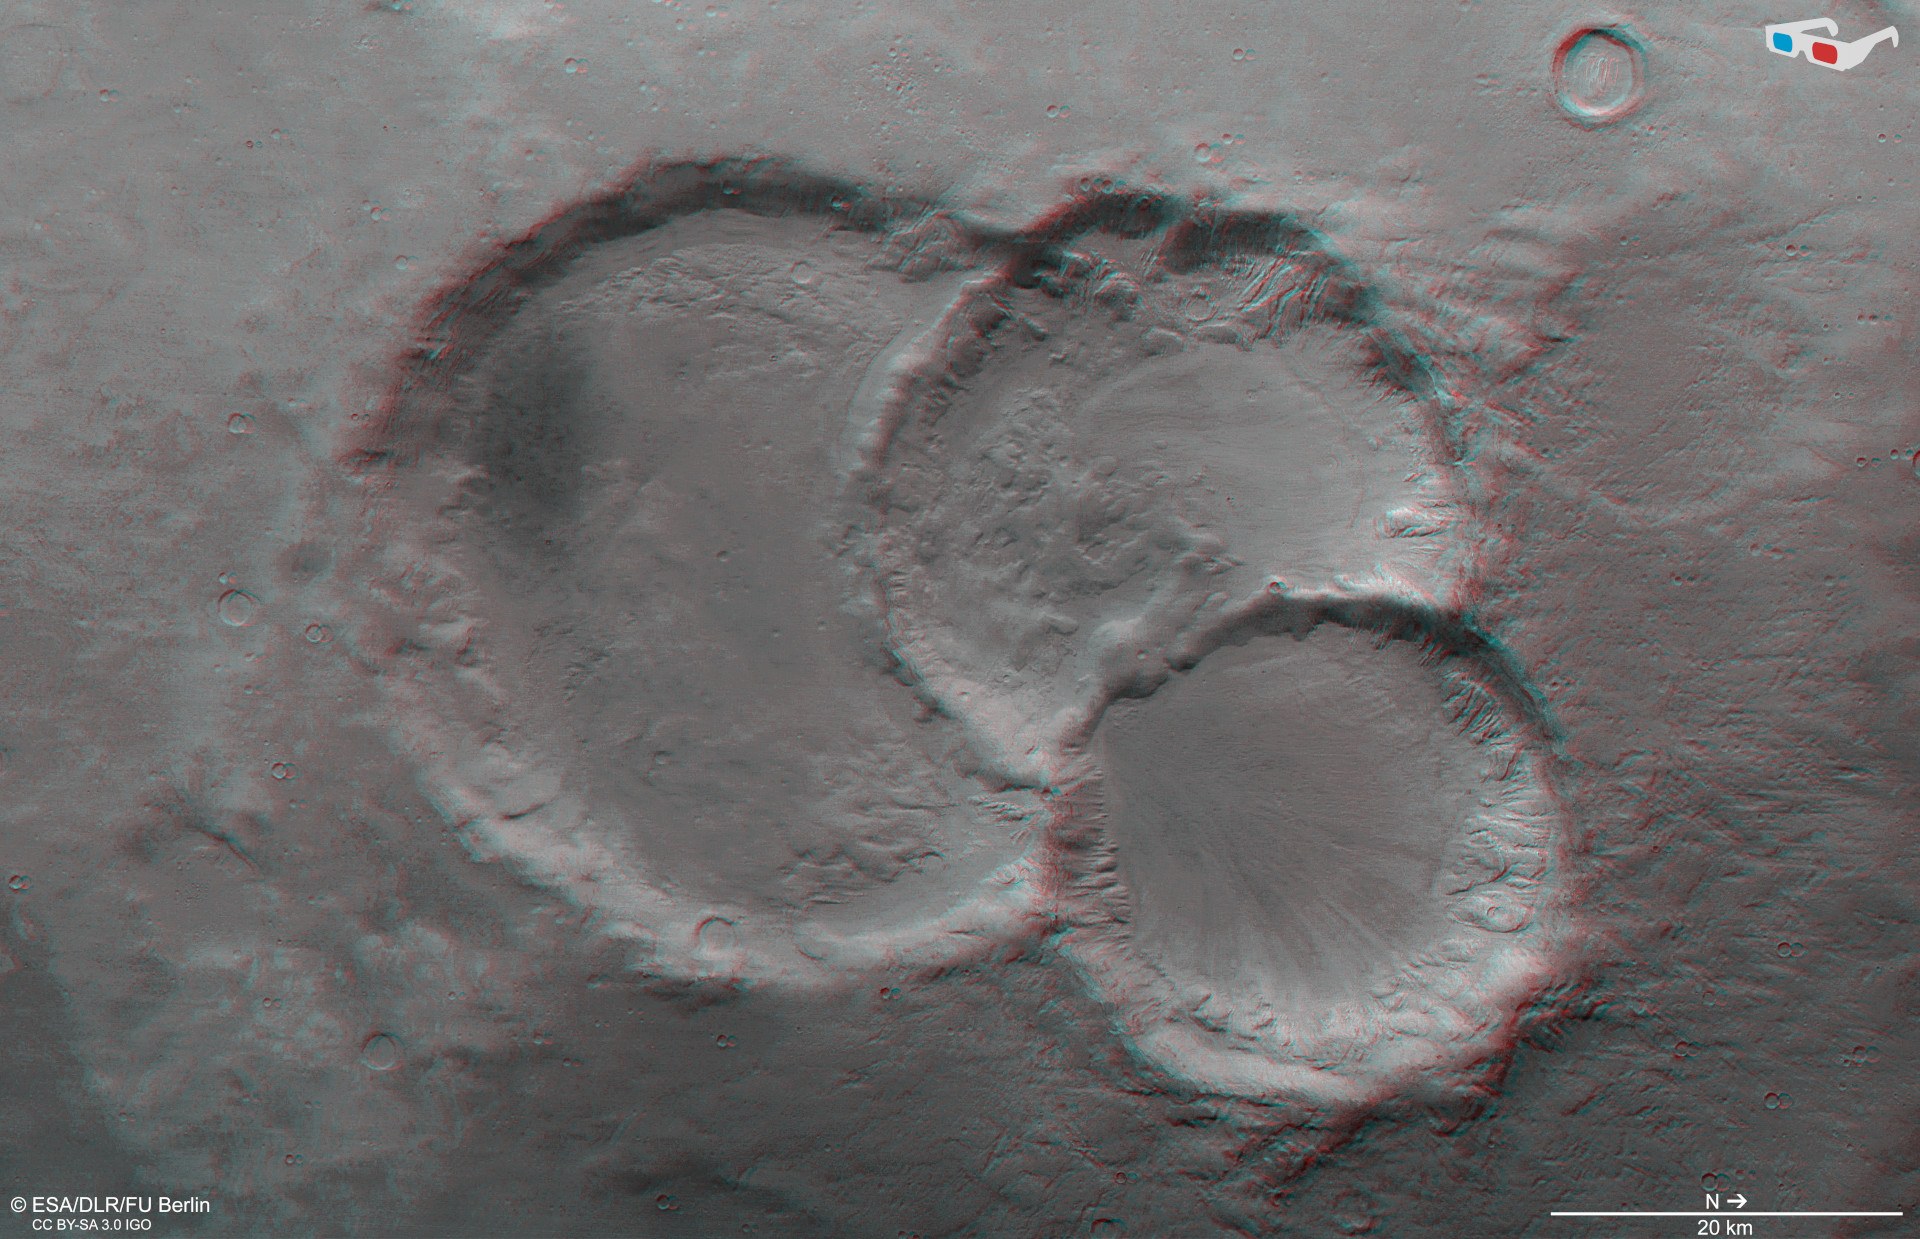 3D view of a crater triplet in Noachis Terra